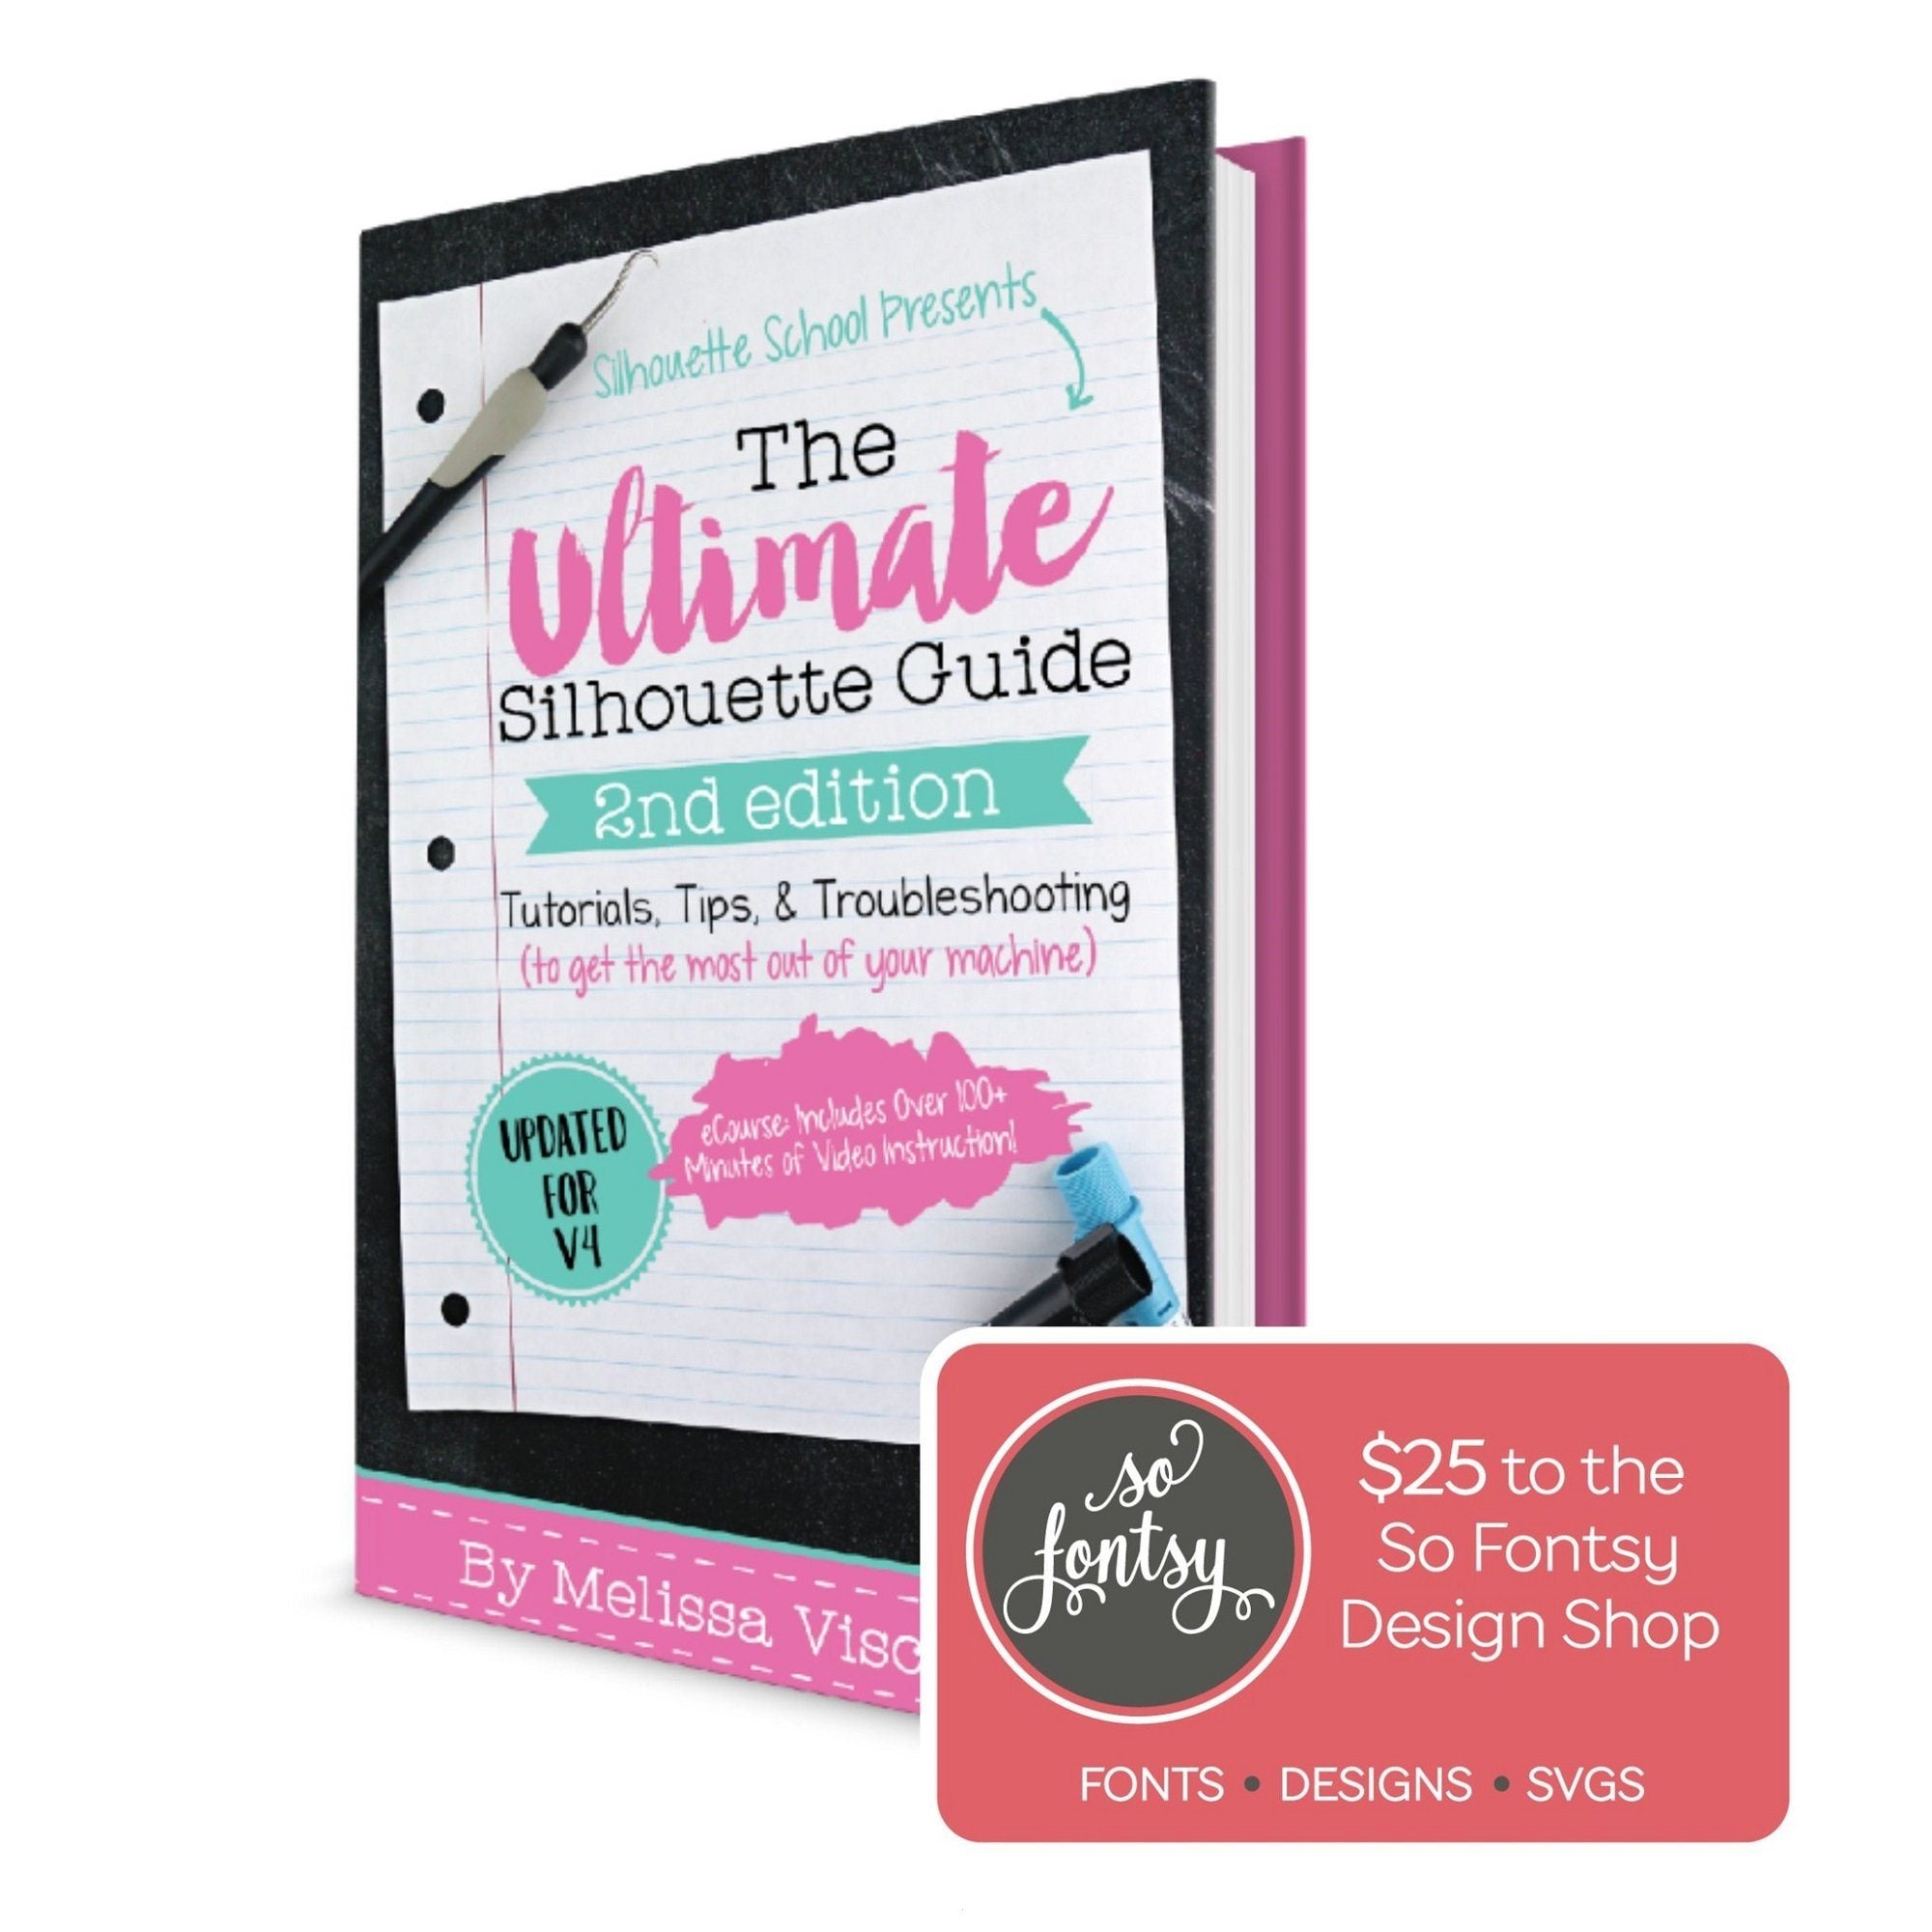 The Ultimate Silhouette E-Book by Silhouette School, 2nd Edition